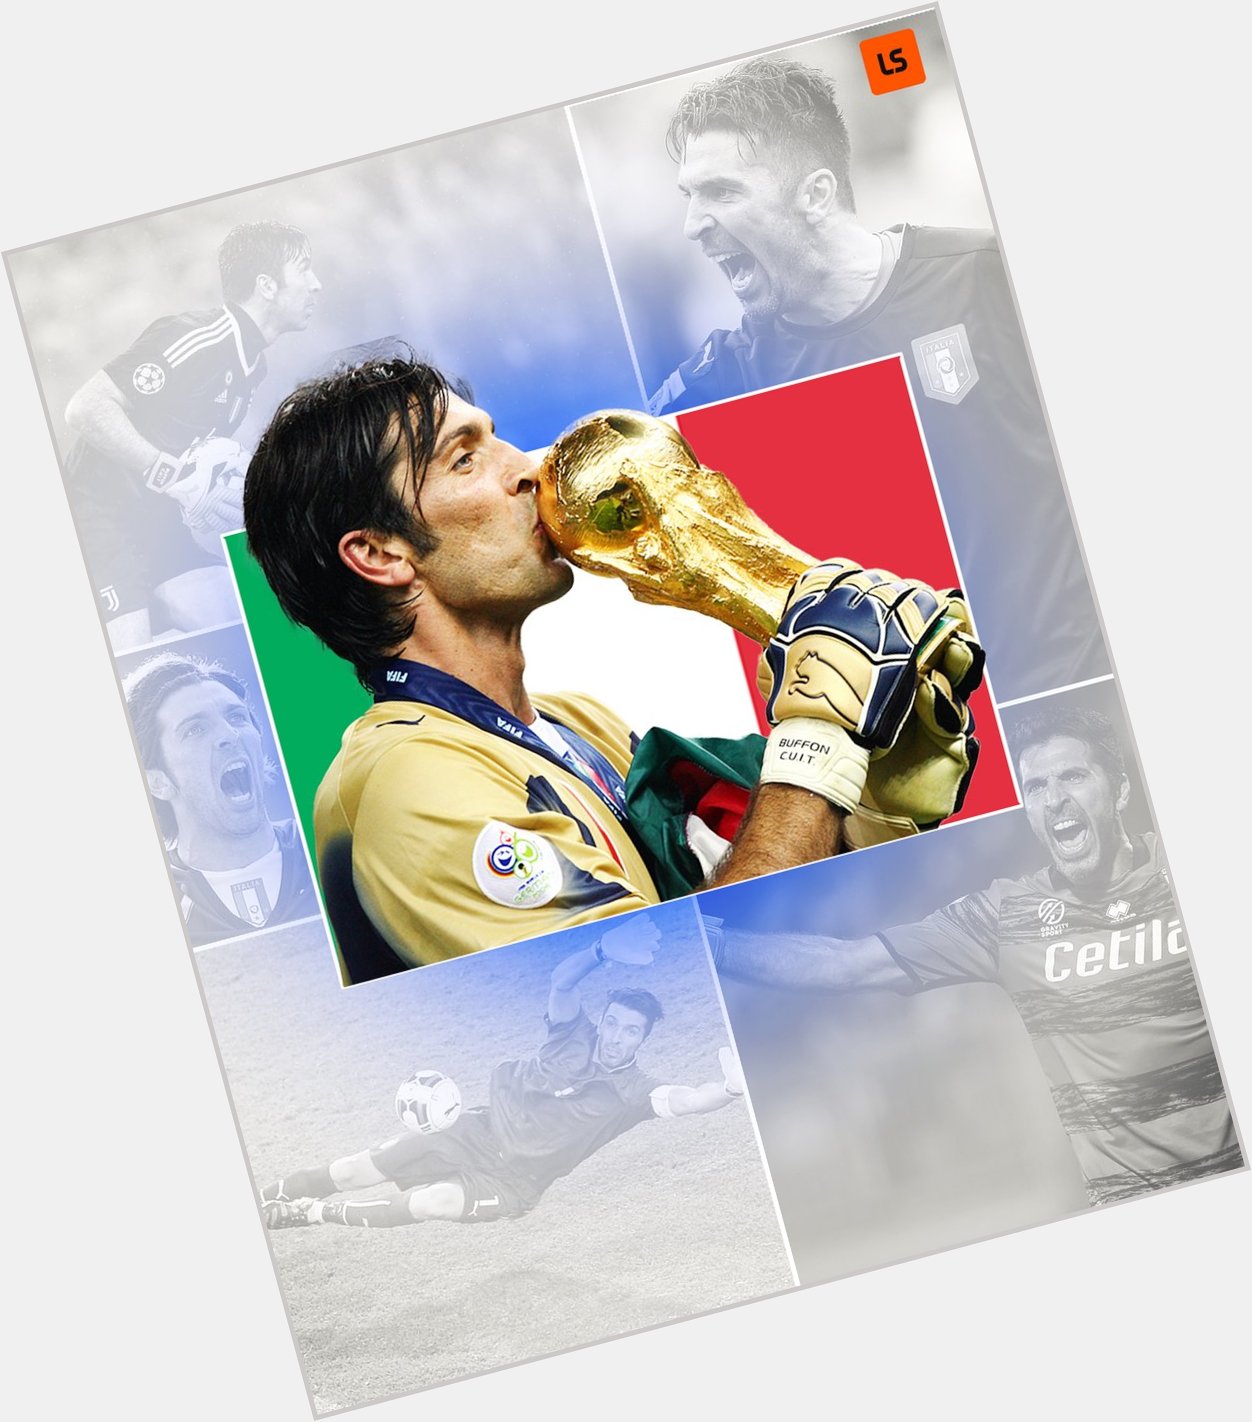 Happy birthday to one of the greatest keepers of all-time, Gianluigi Buffon   